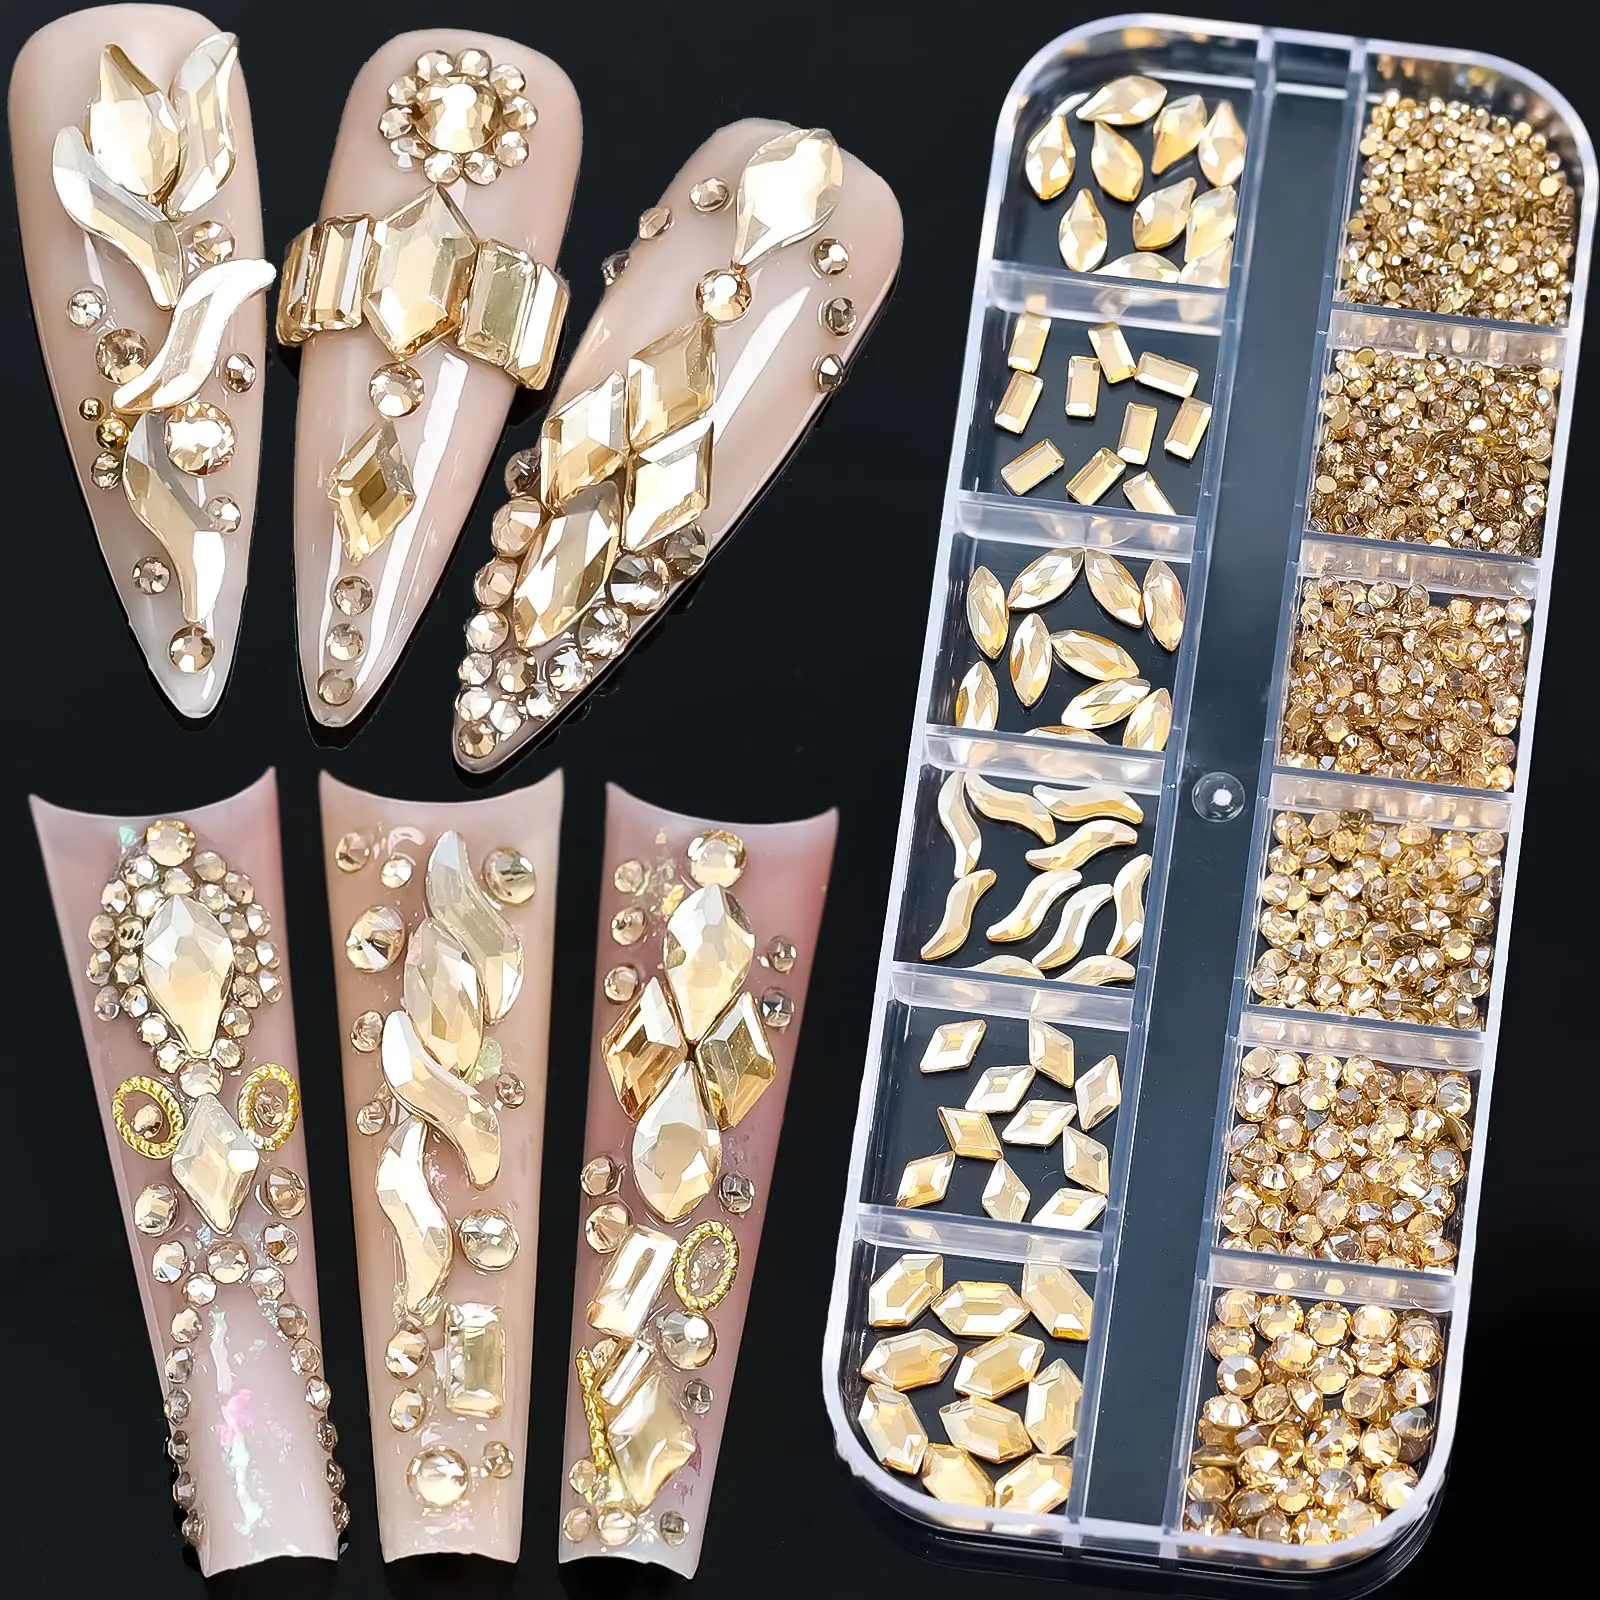 Décorations Nail Art 920 pièces strass Champagne pour ongles or Champagne  Bling Nail Art bijoux dos plat tailles mixtes or-diamant pierre gemme 230927